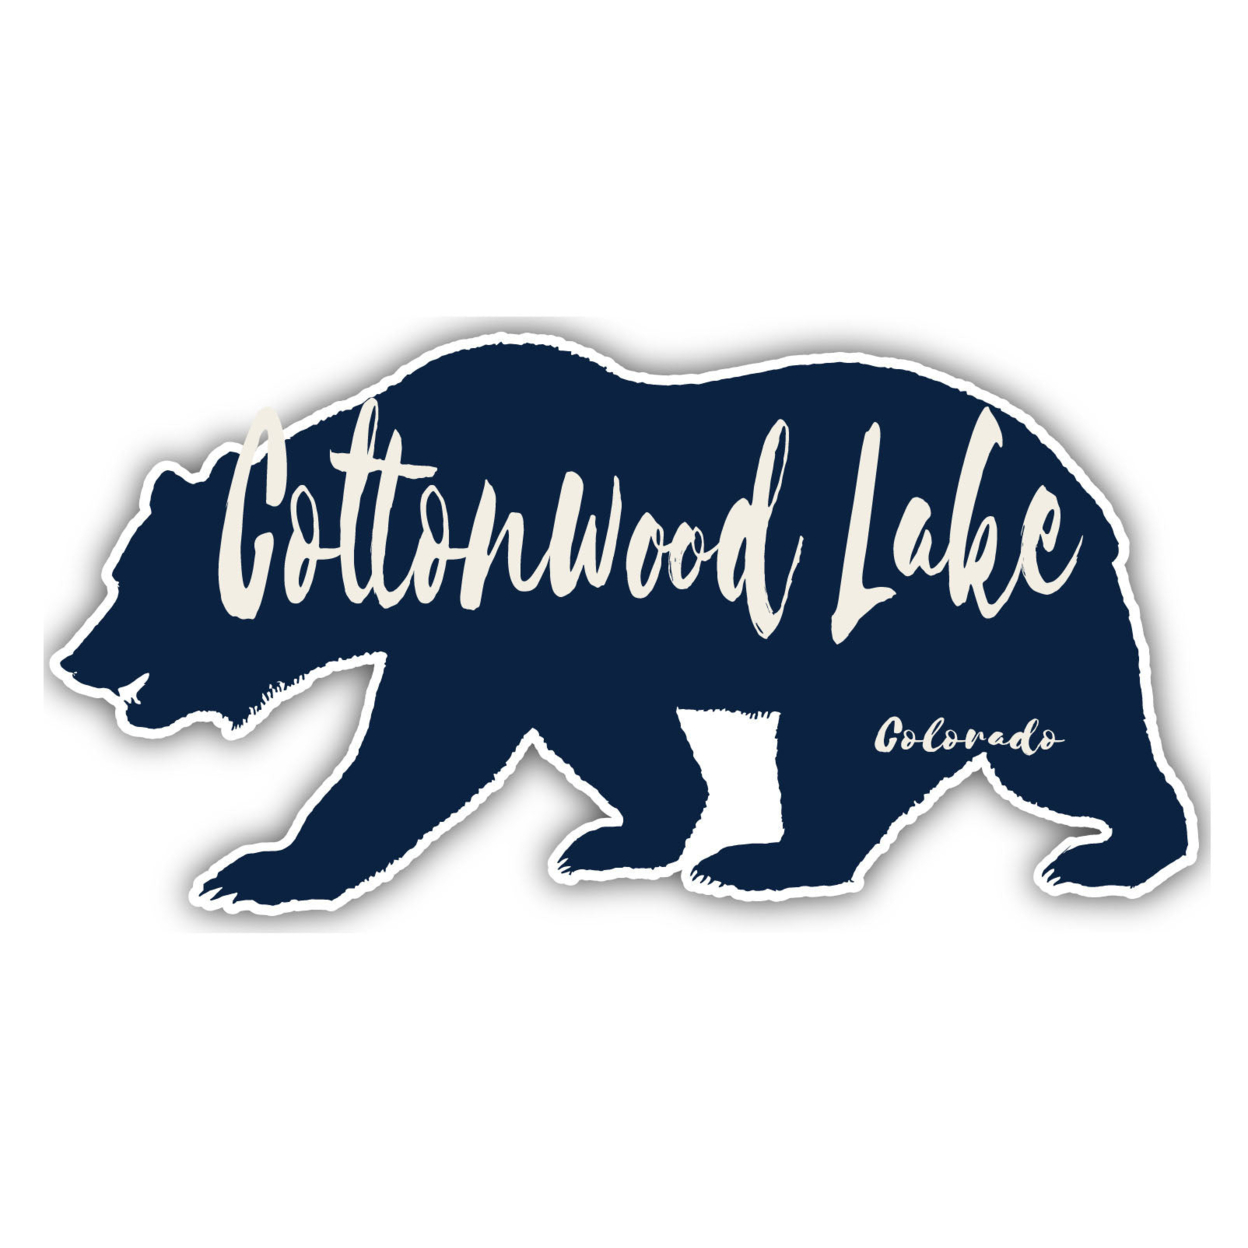 Cottonwood Lake Colorado Souvenir Decorative Stickers (Choose Theme And Size) - 4-Pack, 2-Inch, Tent